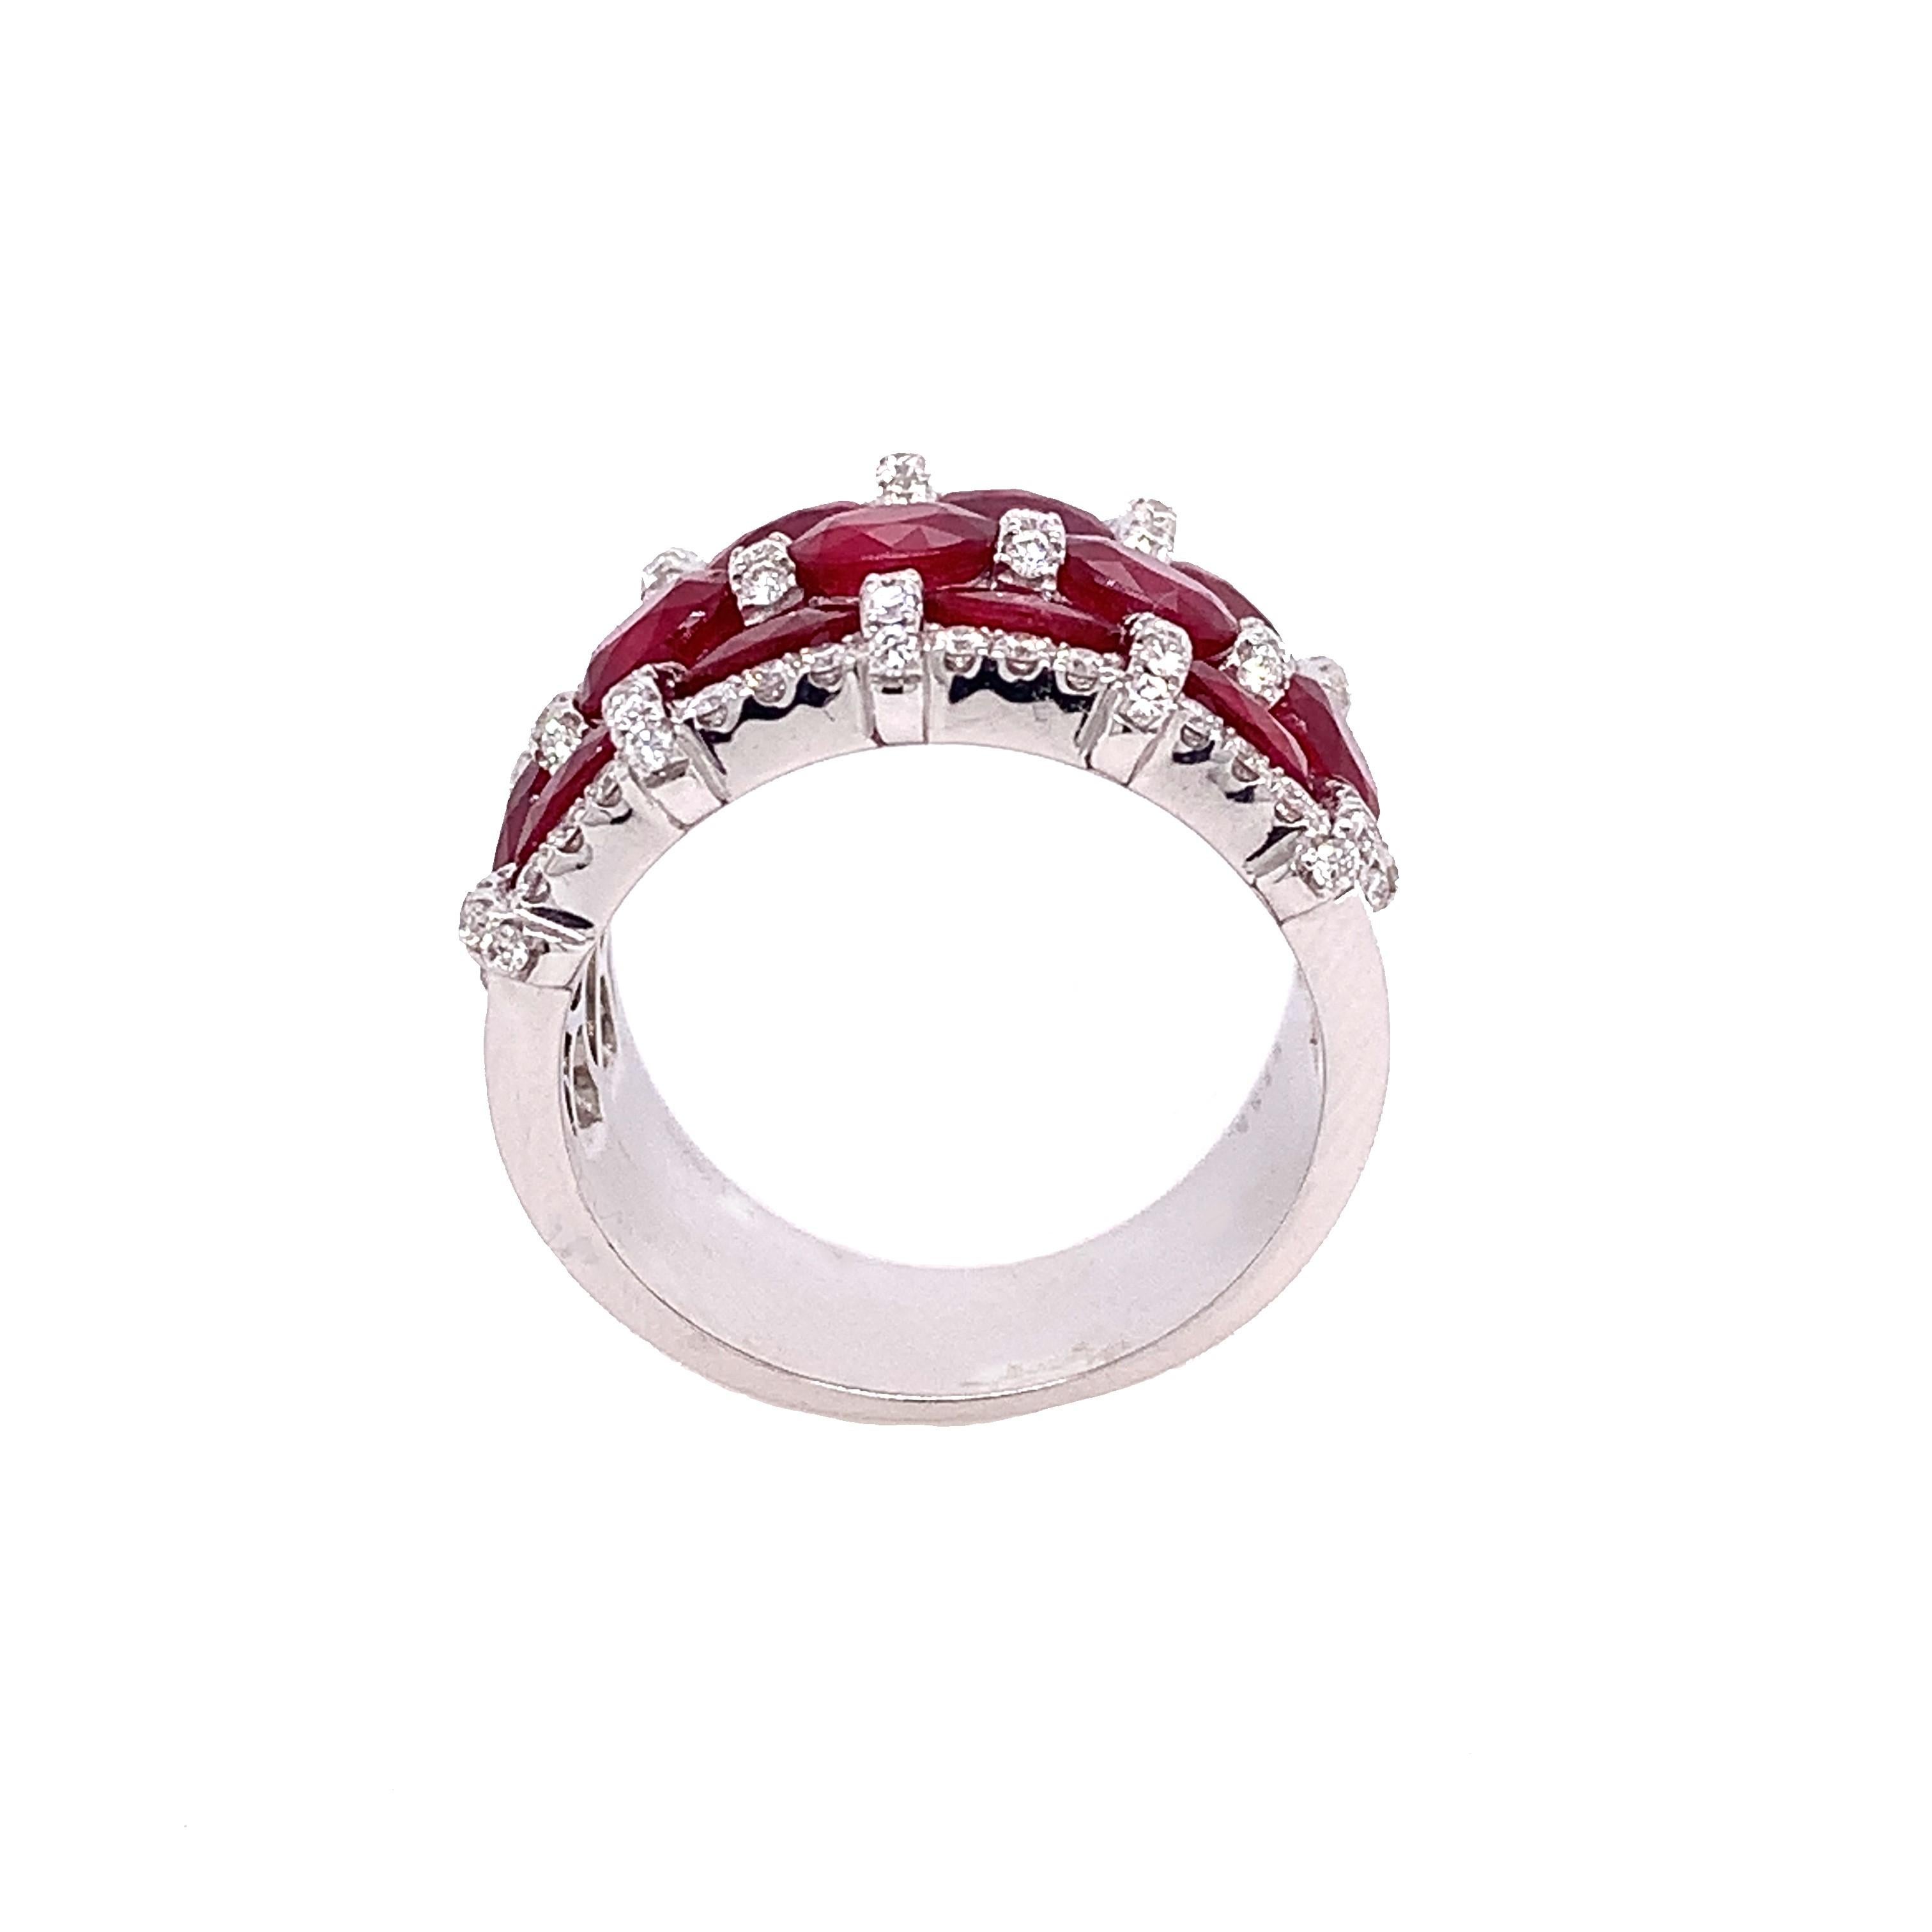 Passion Collection

Oval shape Rubies combine with Diamonds to form sophisticated wide band crafted in 18 K White Gold.

Ruby: 5.80ct total weight.
Diamond: 0.73ct total weight.
All diamonds are G-H/SI stones.